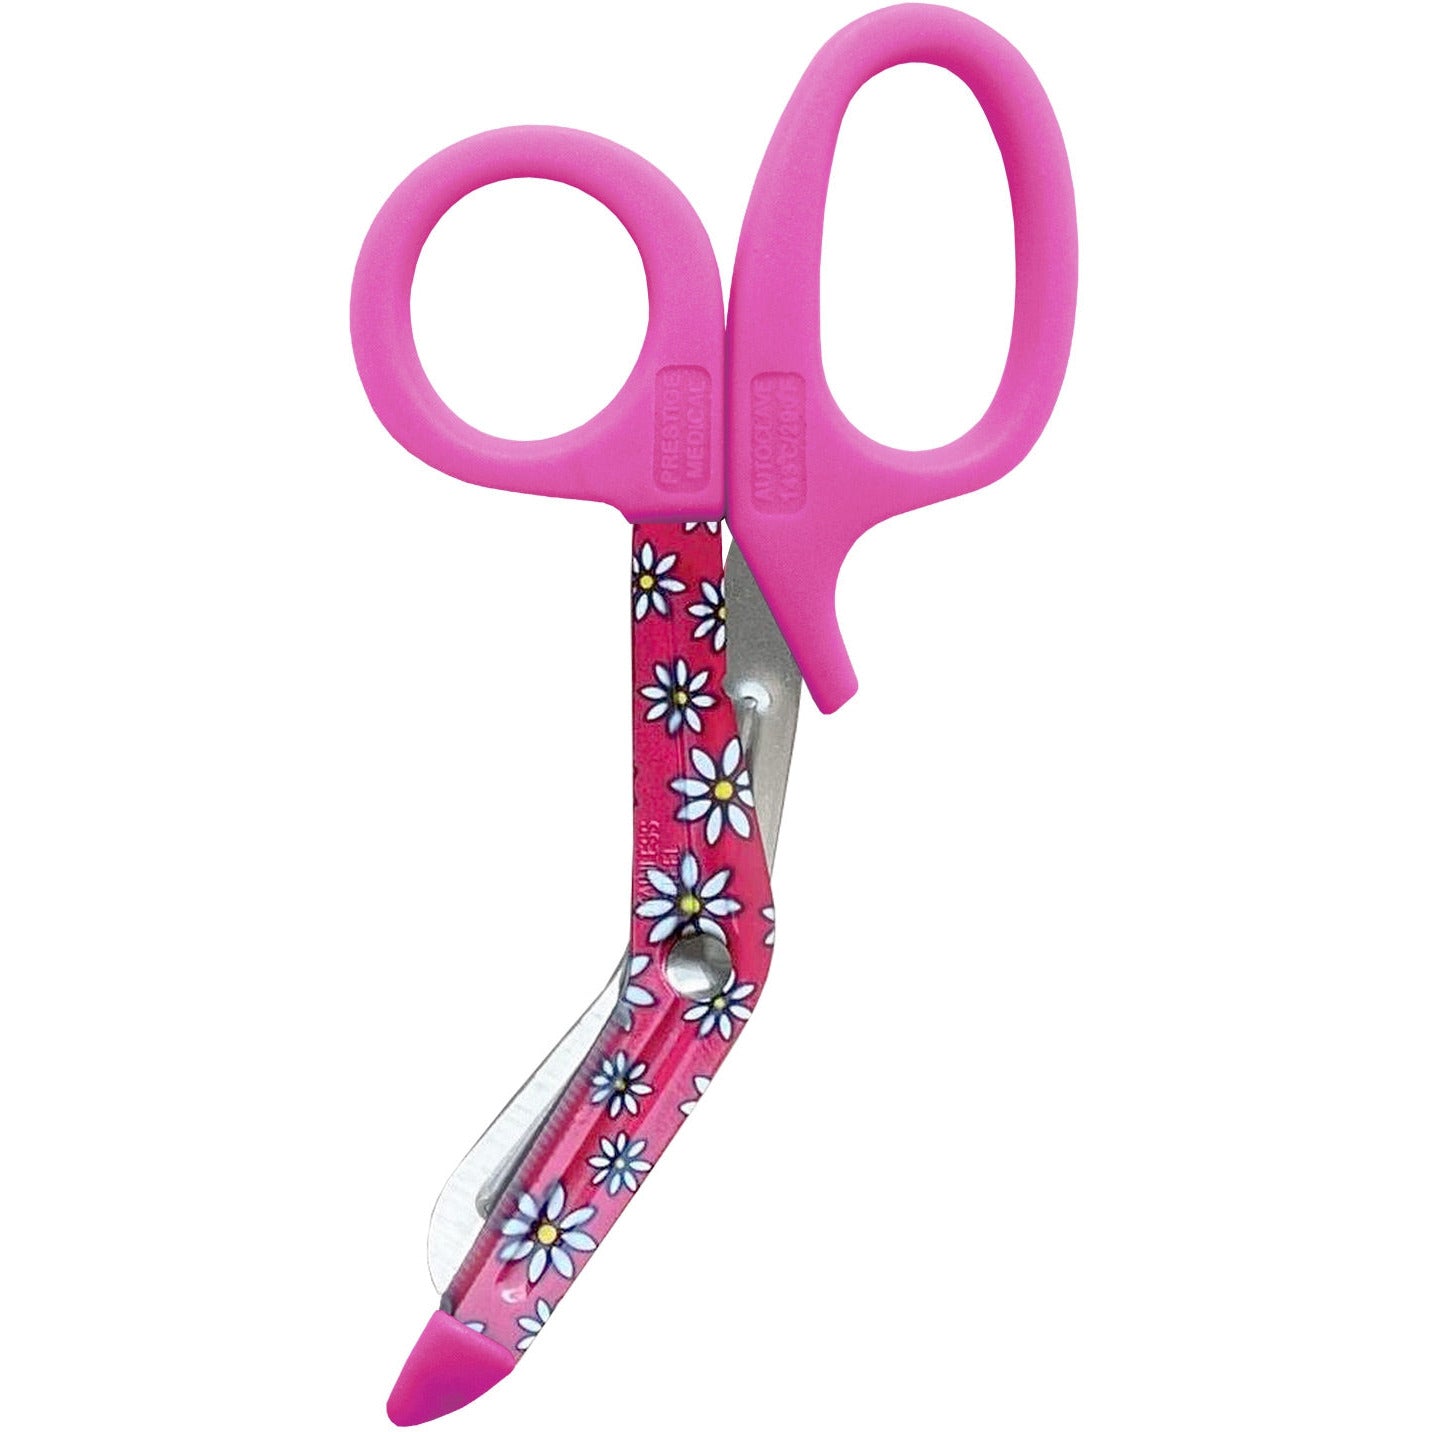 5.5" StyleMate Utility Scissors - Daisies Hot Pink